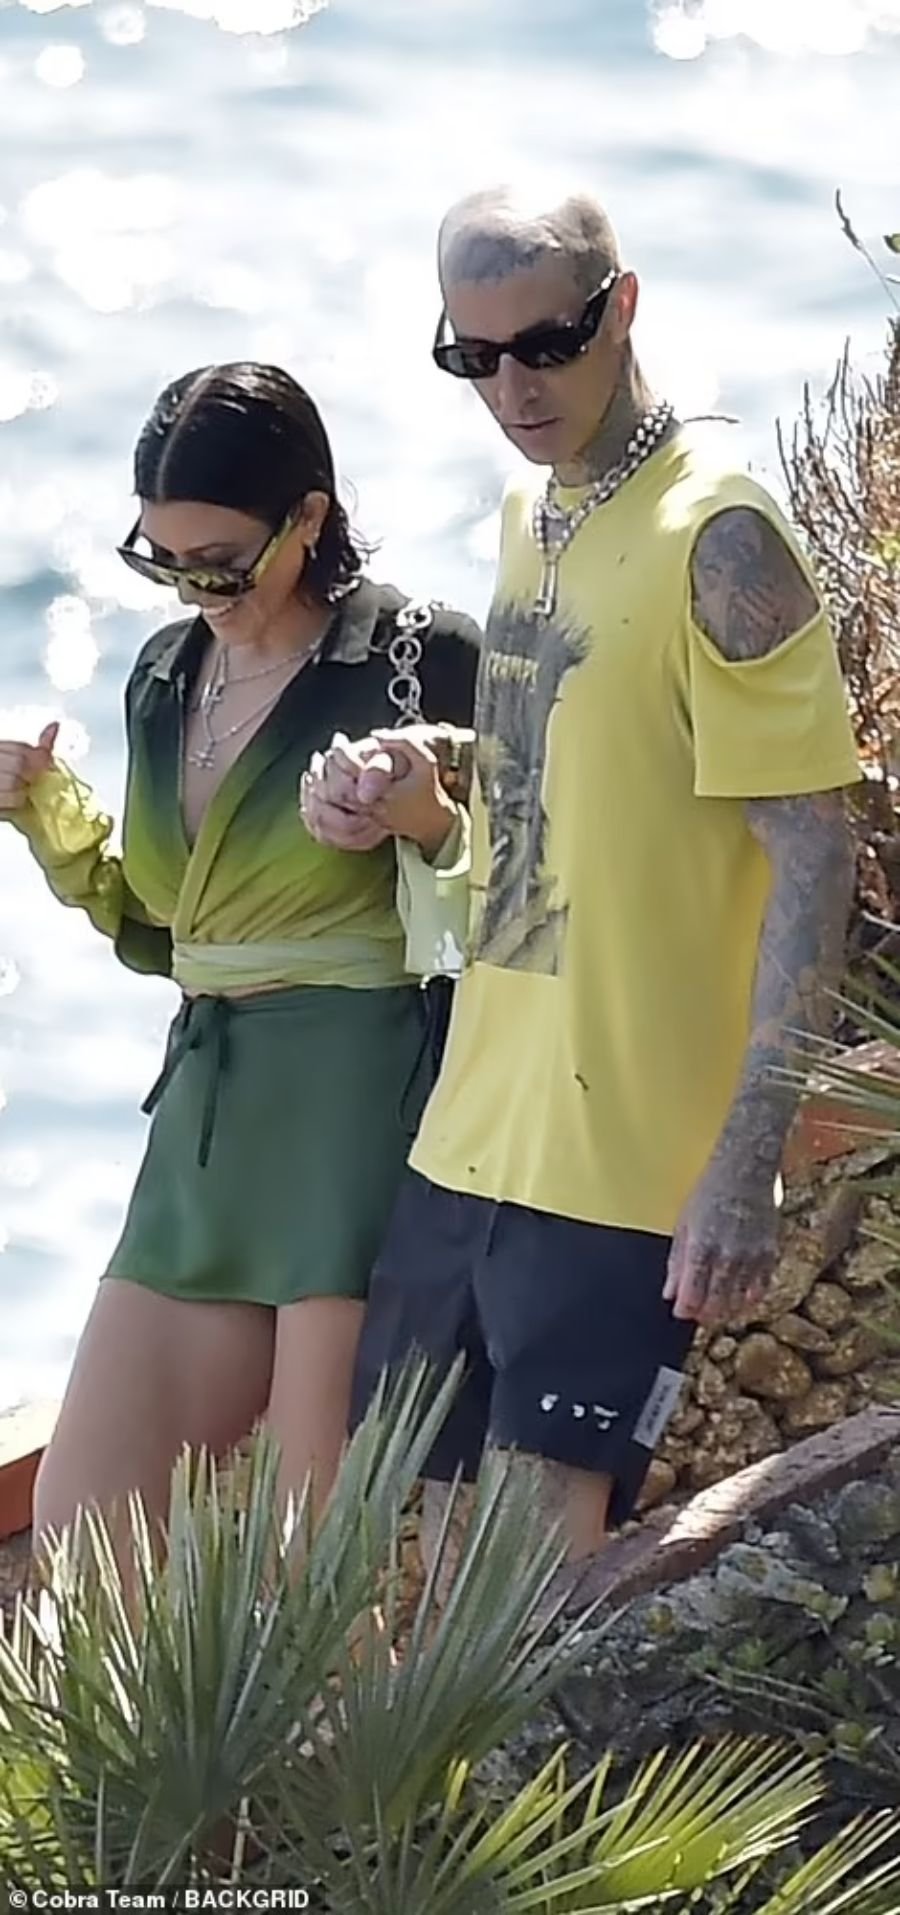 Kourtney Kardashian and Travis Barker on vacation in Italy - Passionate touches, bold poses